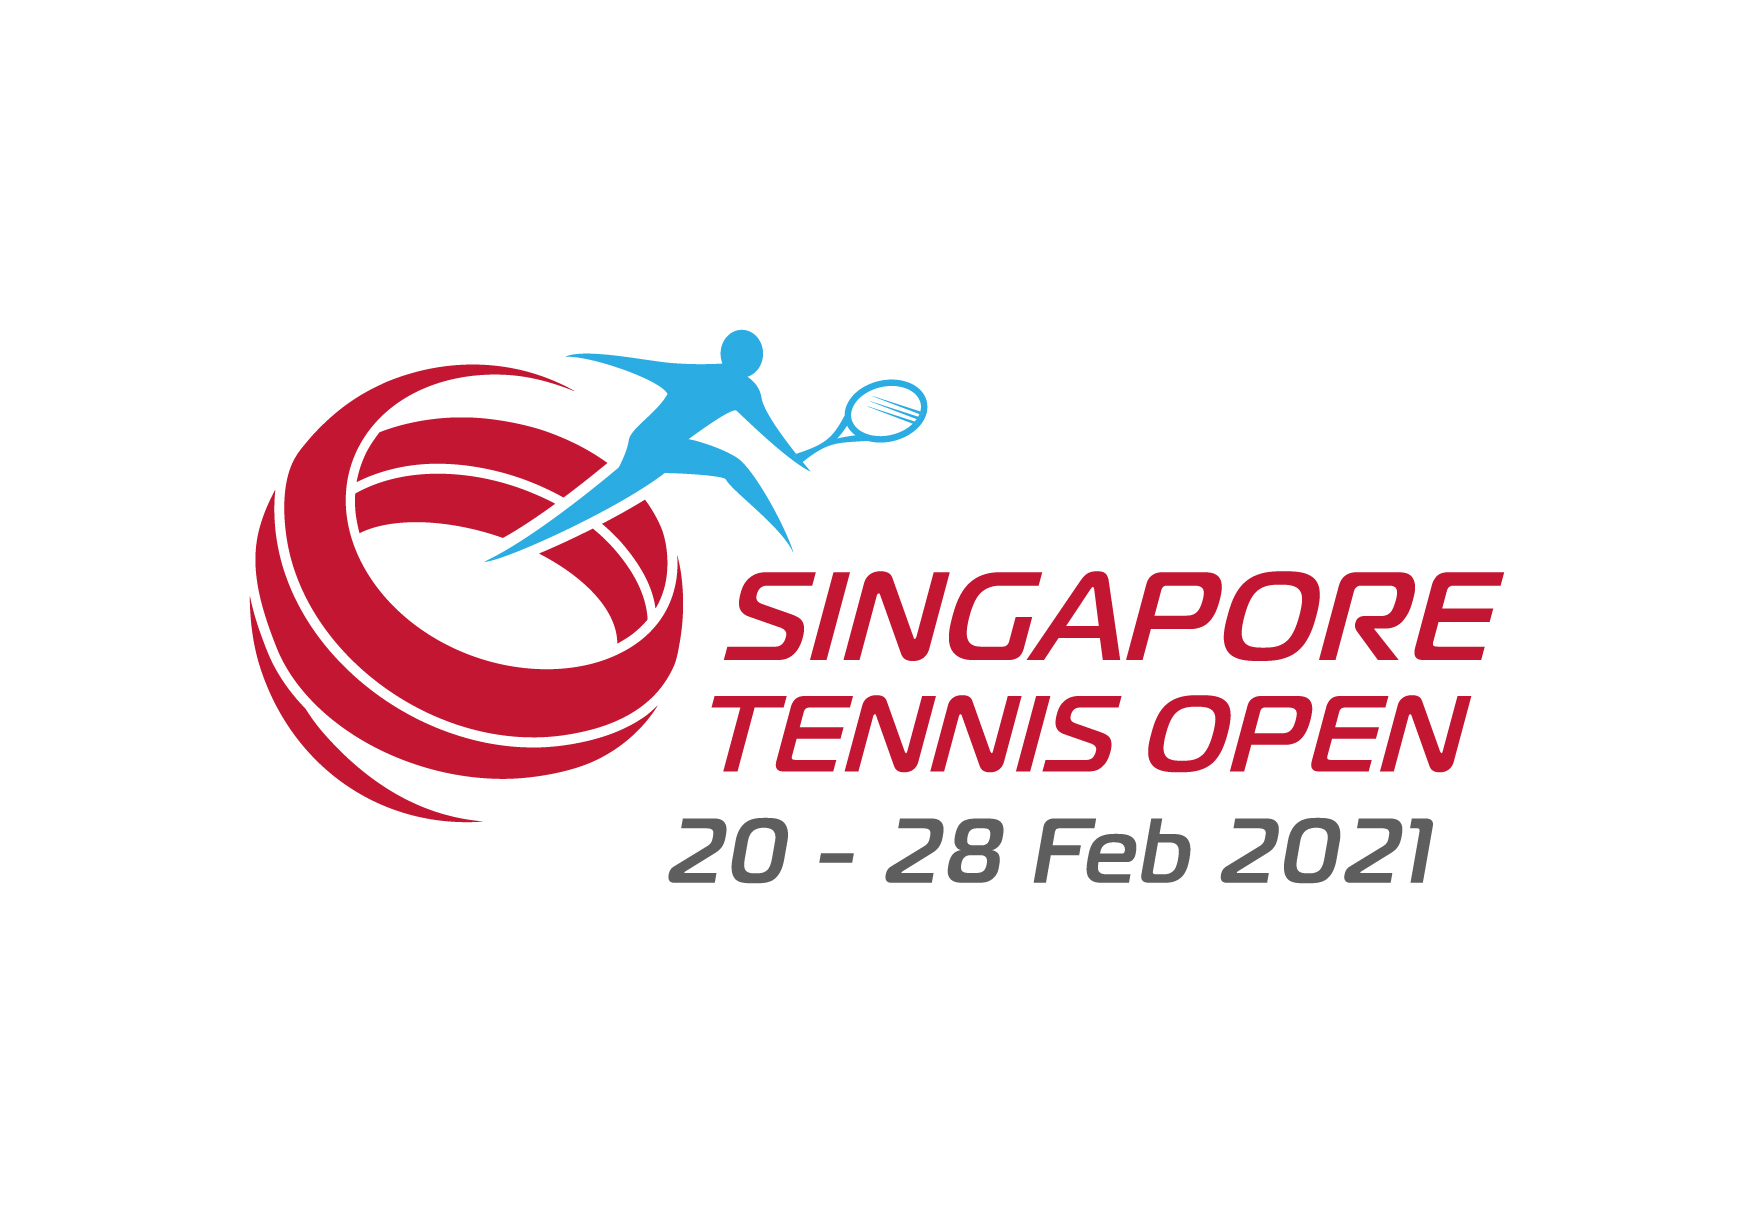 Singapore Tennis Open Semifinals and Finals Tickets sold out!